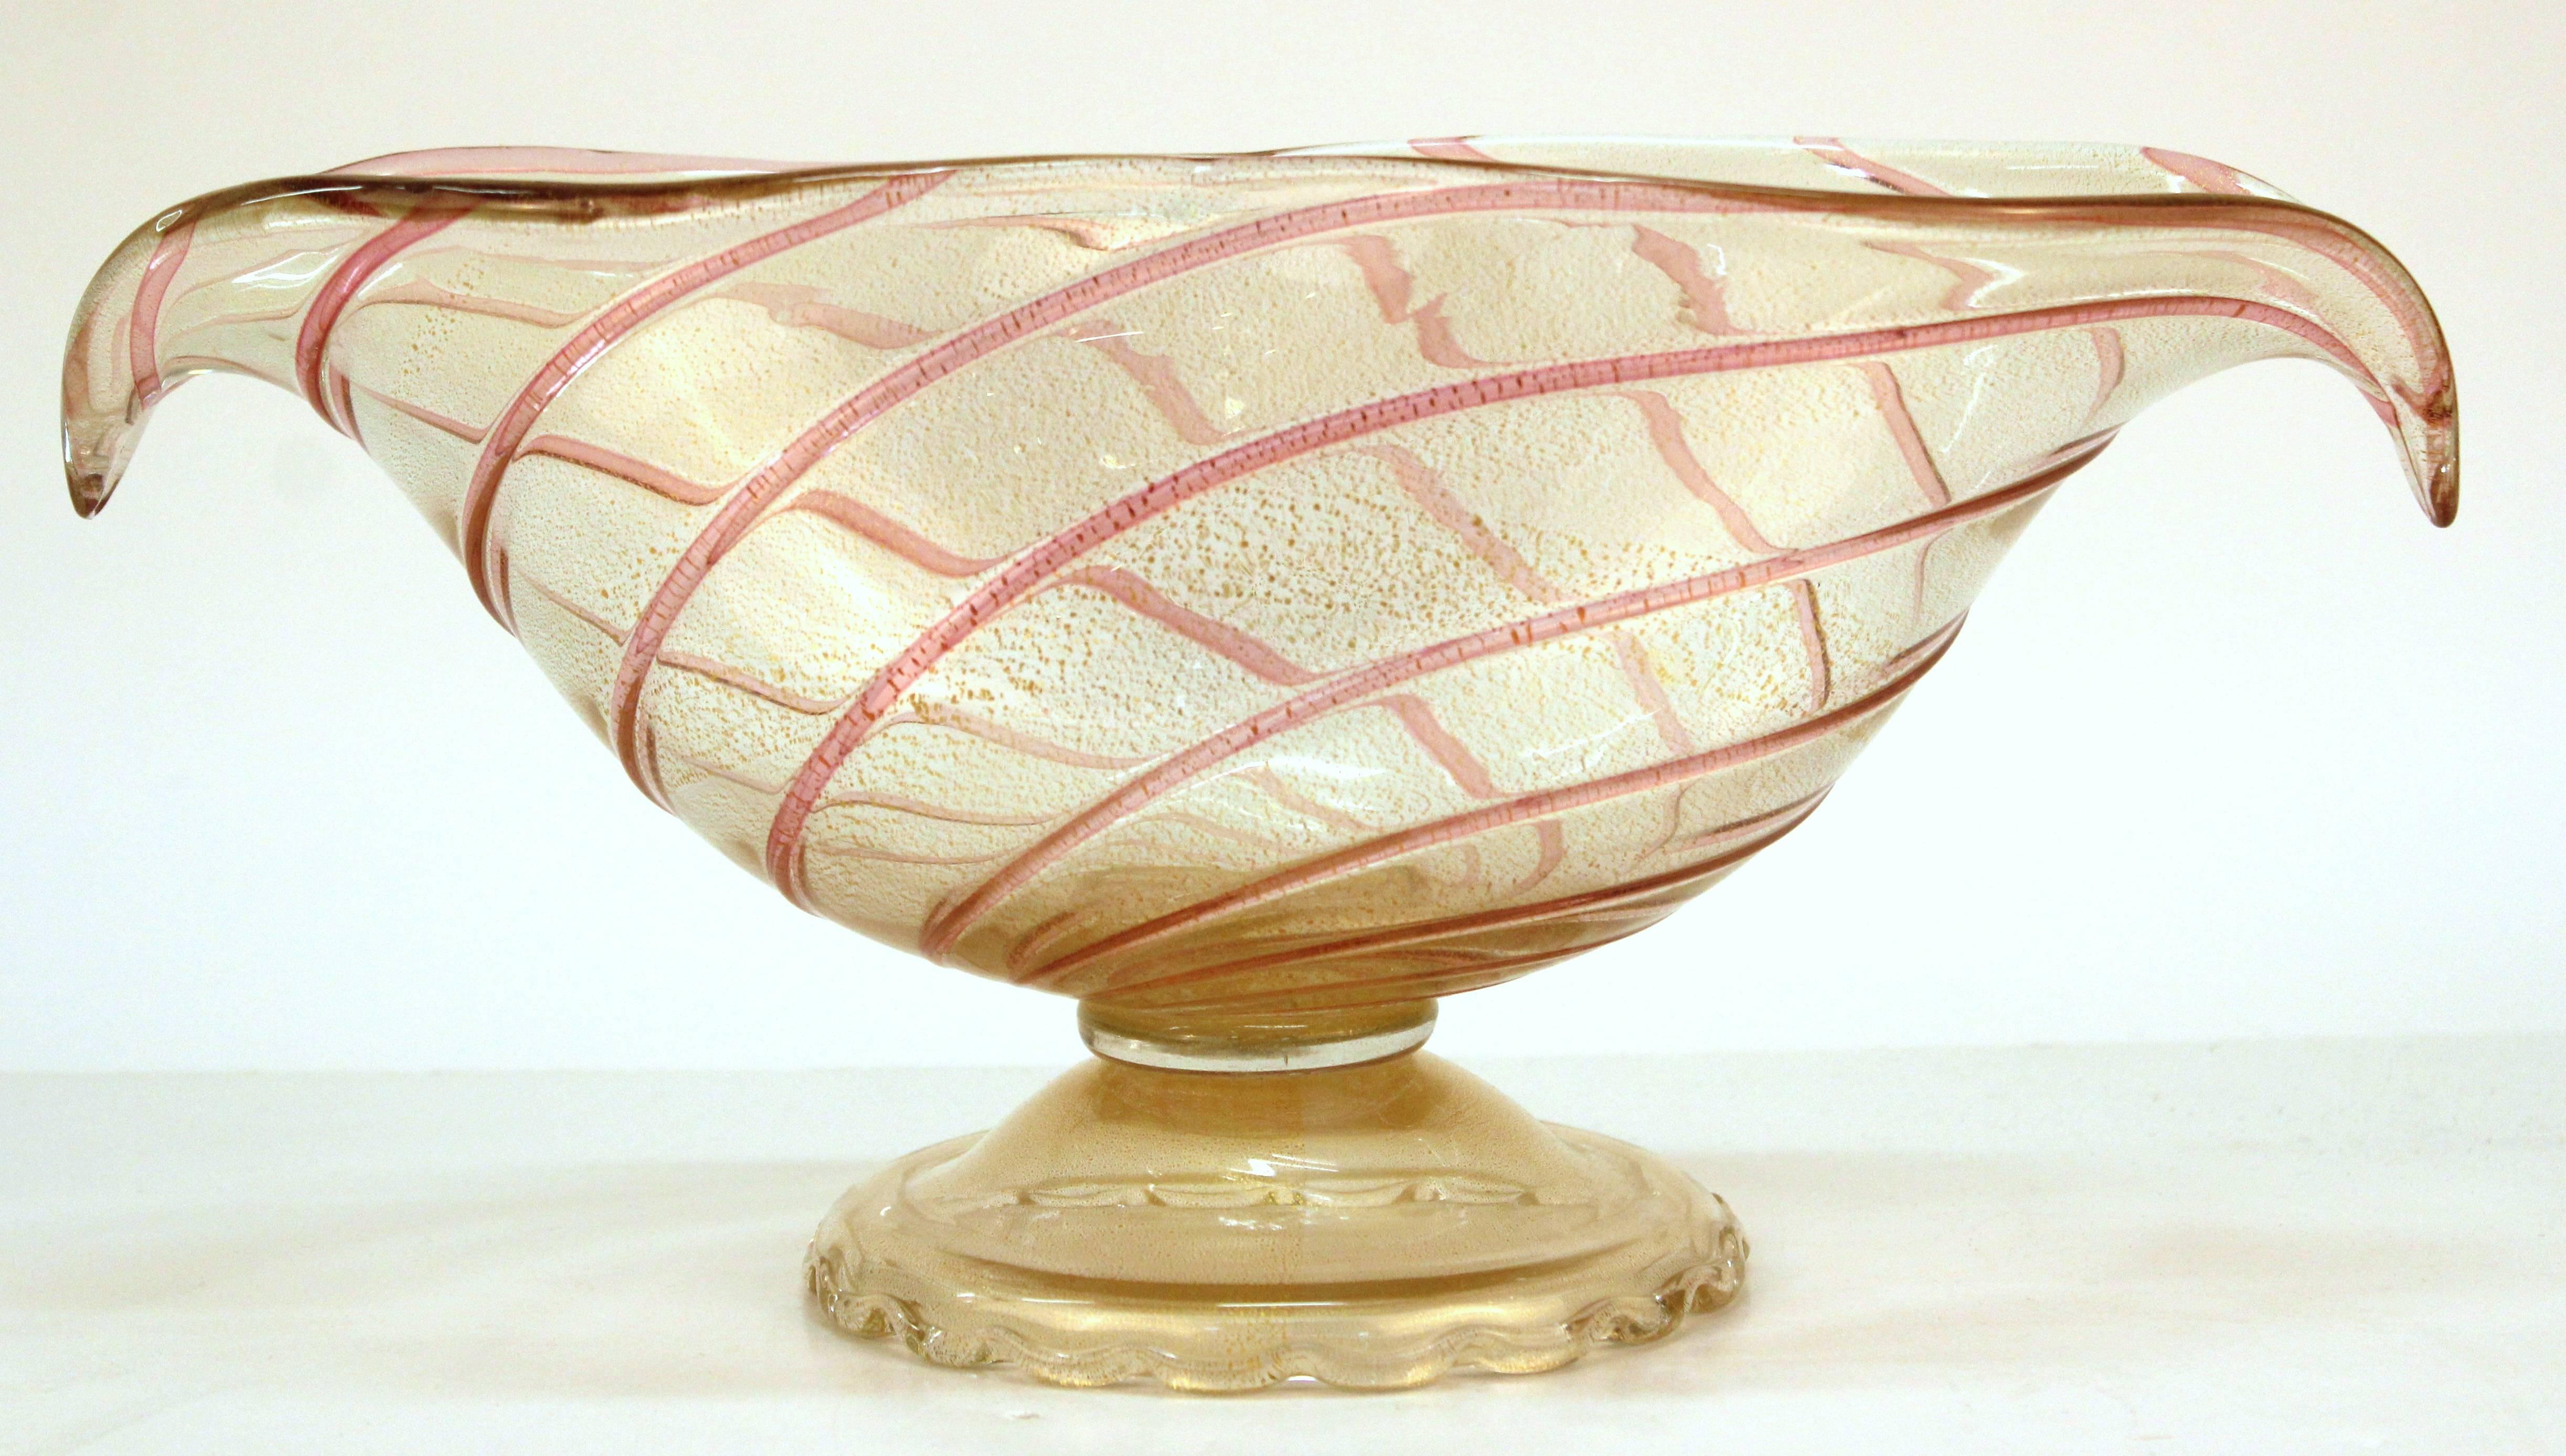 Italian Murano Glass Vase or Bowl in Swirl Pattern with Gold Flakes